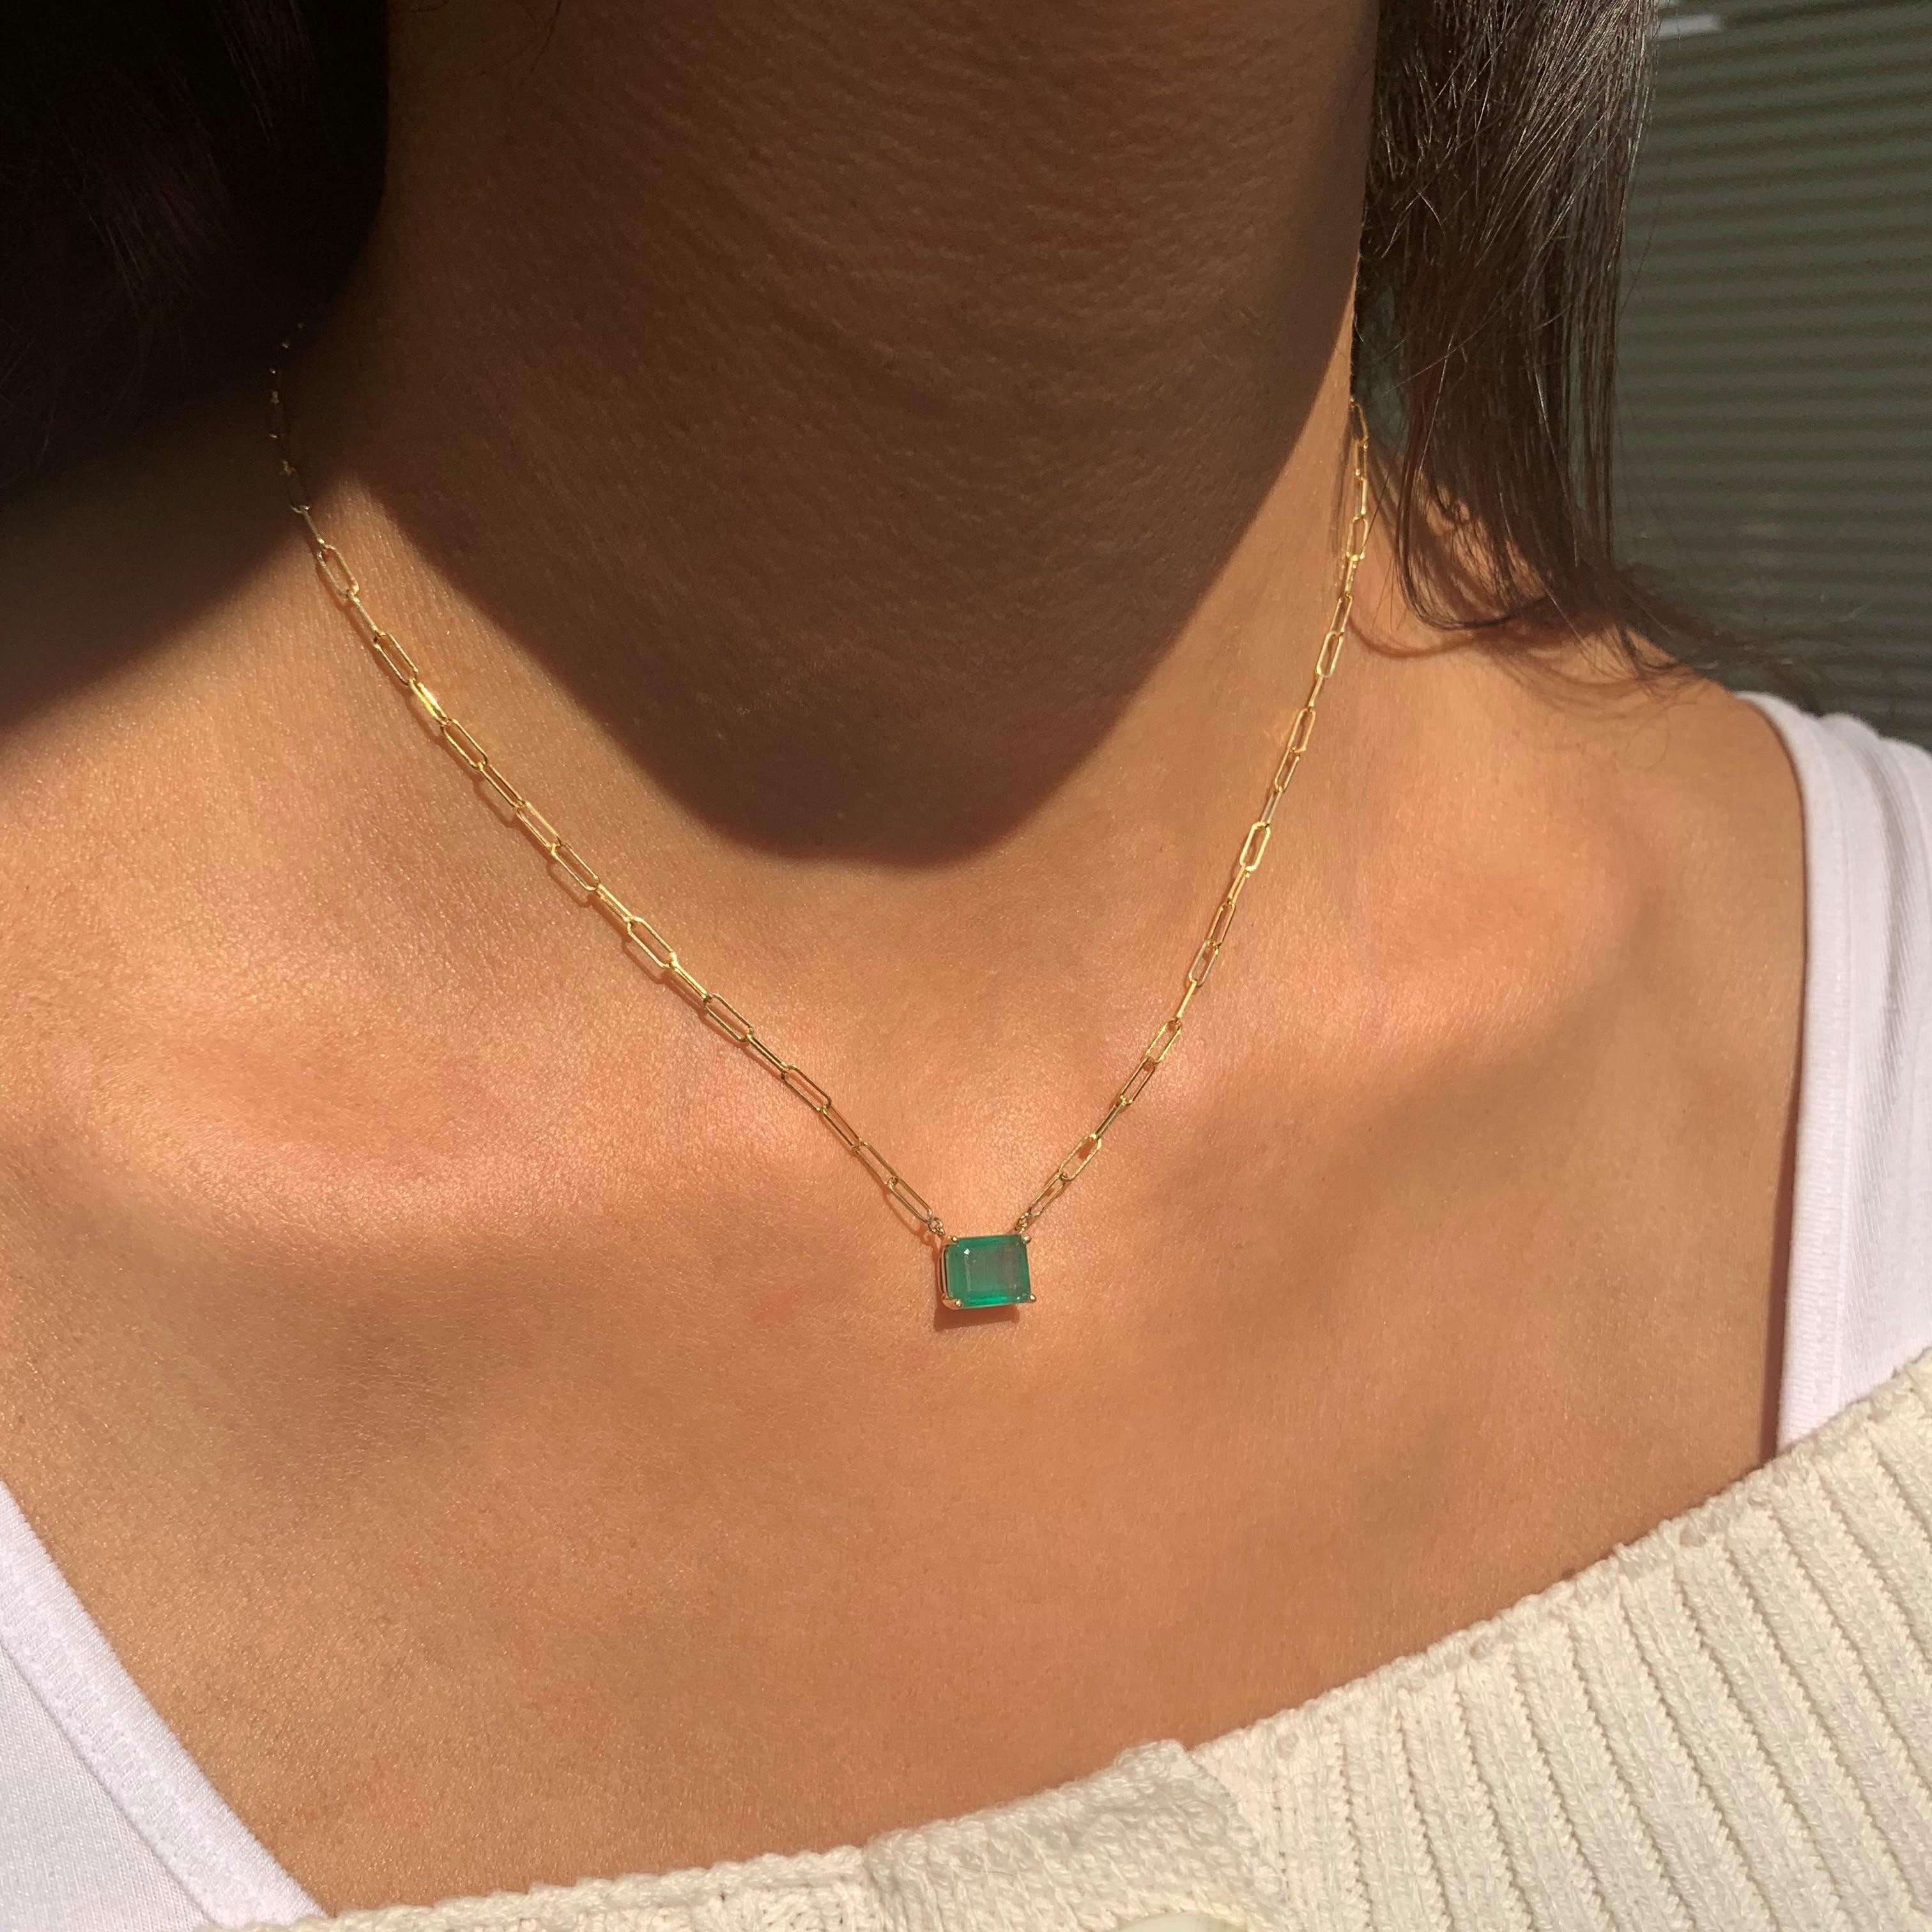 This Elegant & Beautiful 14K Yellow Gold Necklace featuring a deep colored Emerald-Cut 9x7mm Emerald weighs 2 carats and is secured with 4 prongs, hangs on an 16